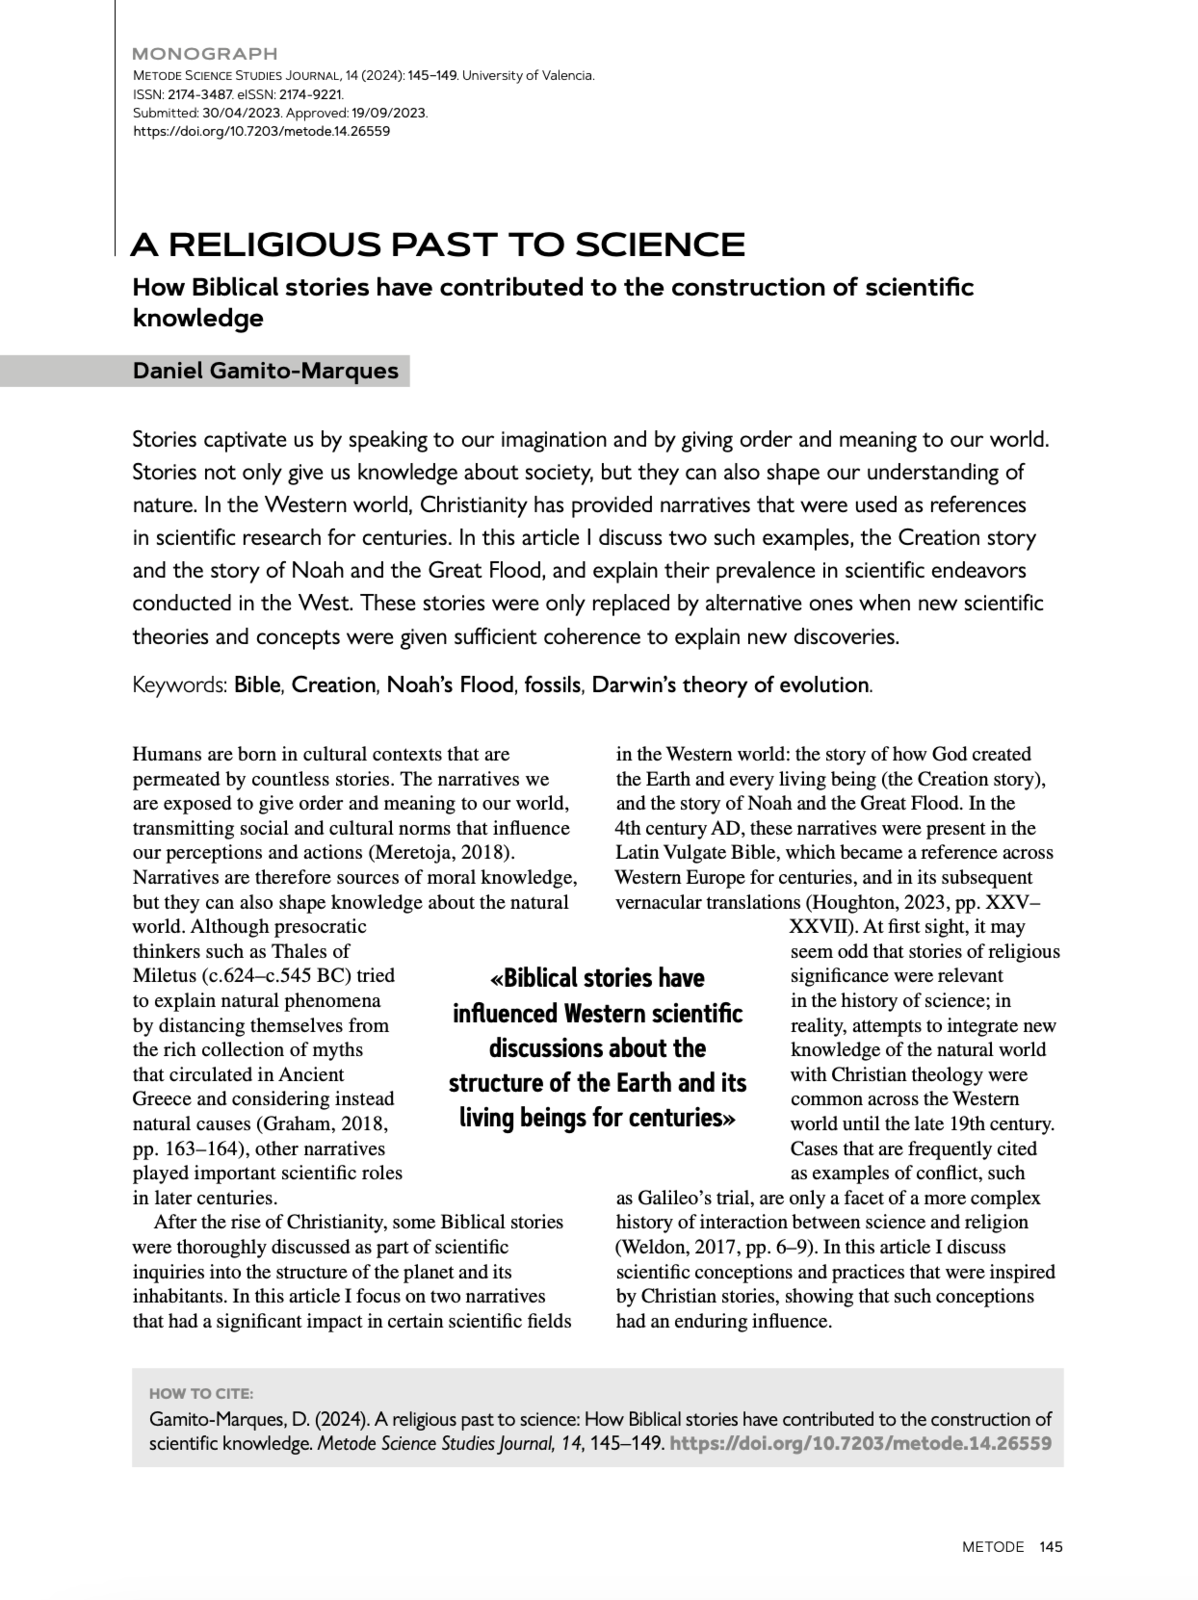 A religious past to science: How Biblical stories have contributed to the construction of scientific knowledge, Capa